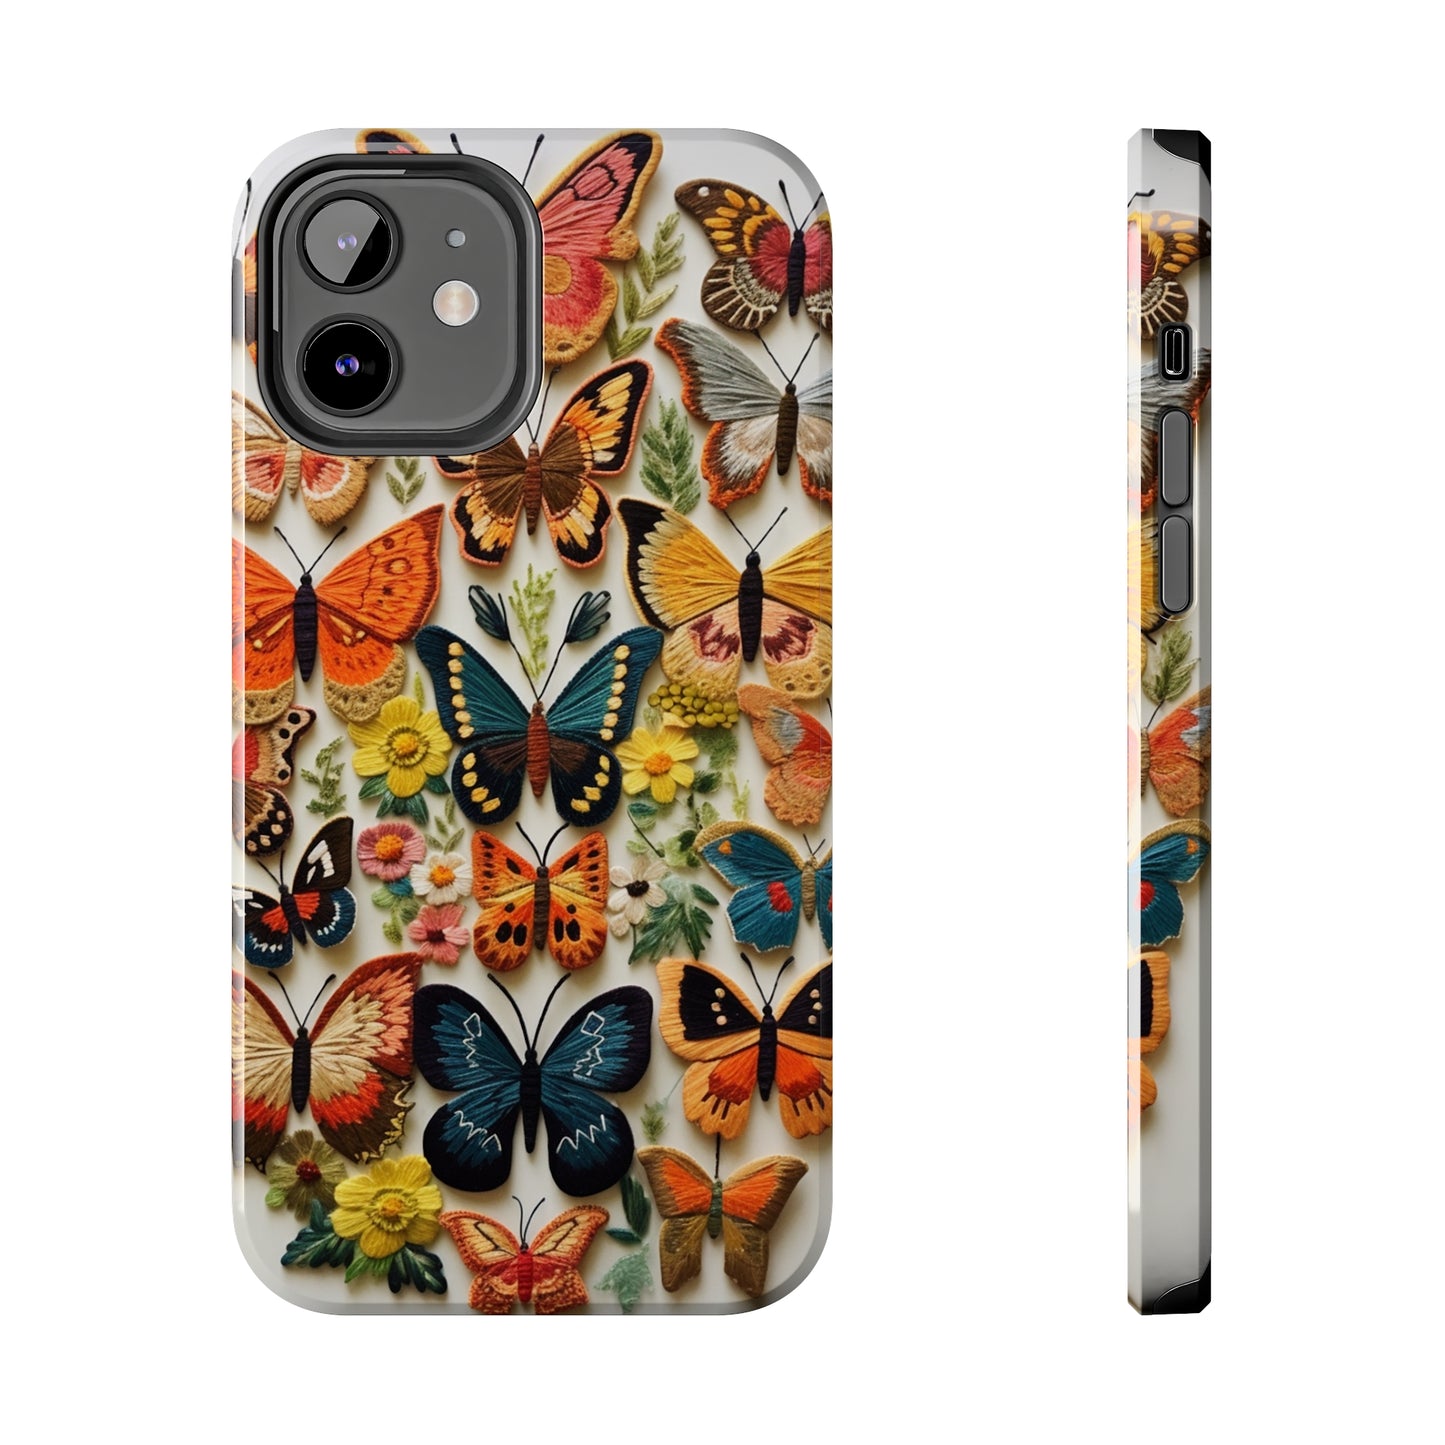 Embroidery Butterflies iPhone Case | Whimsical Elegance and Nature's Beauty in Handcrafted Detail